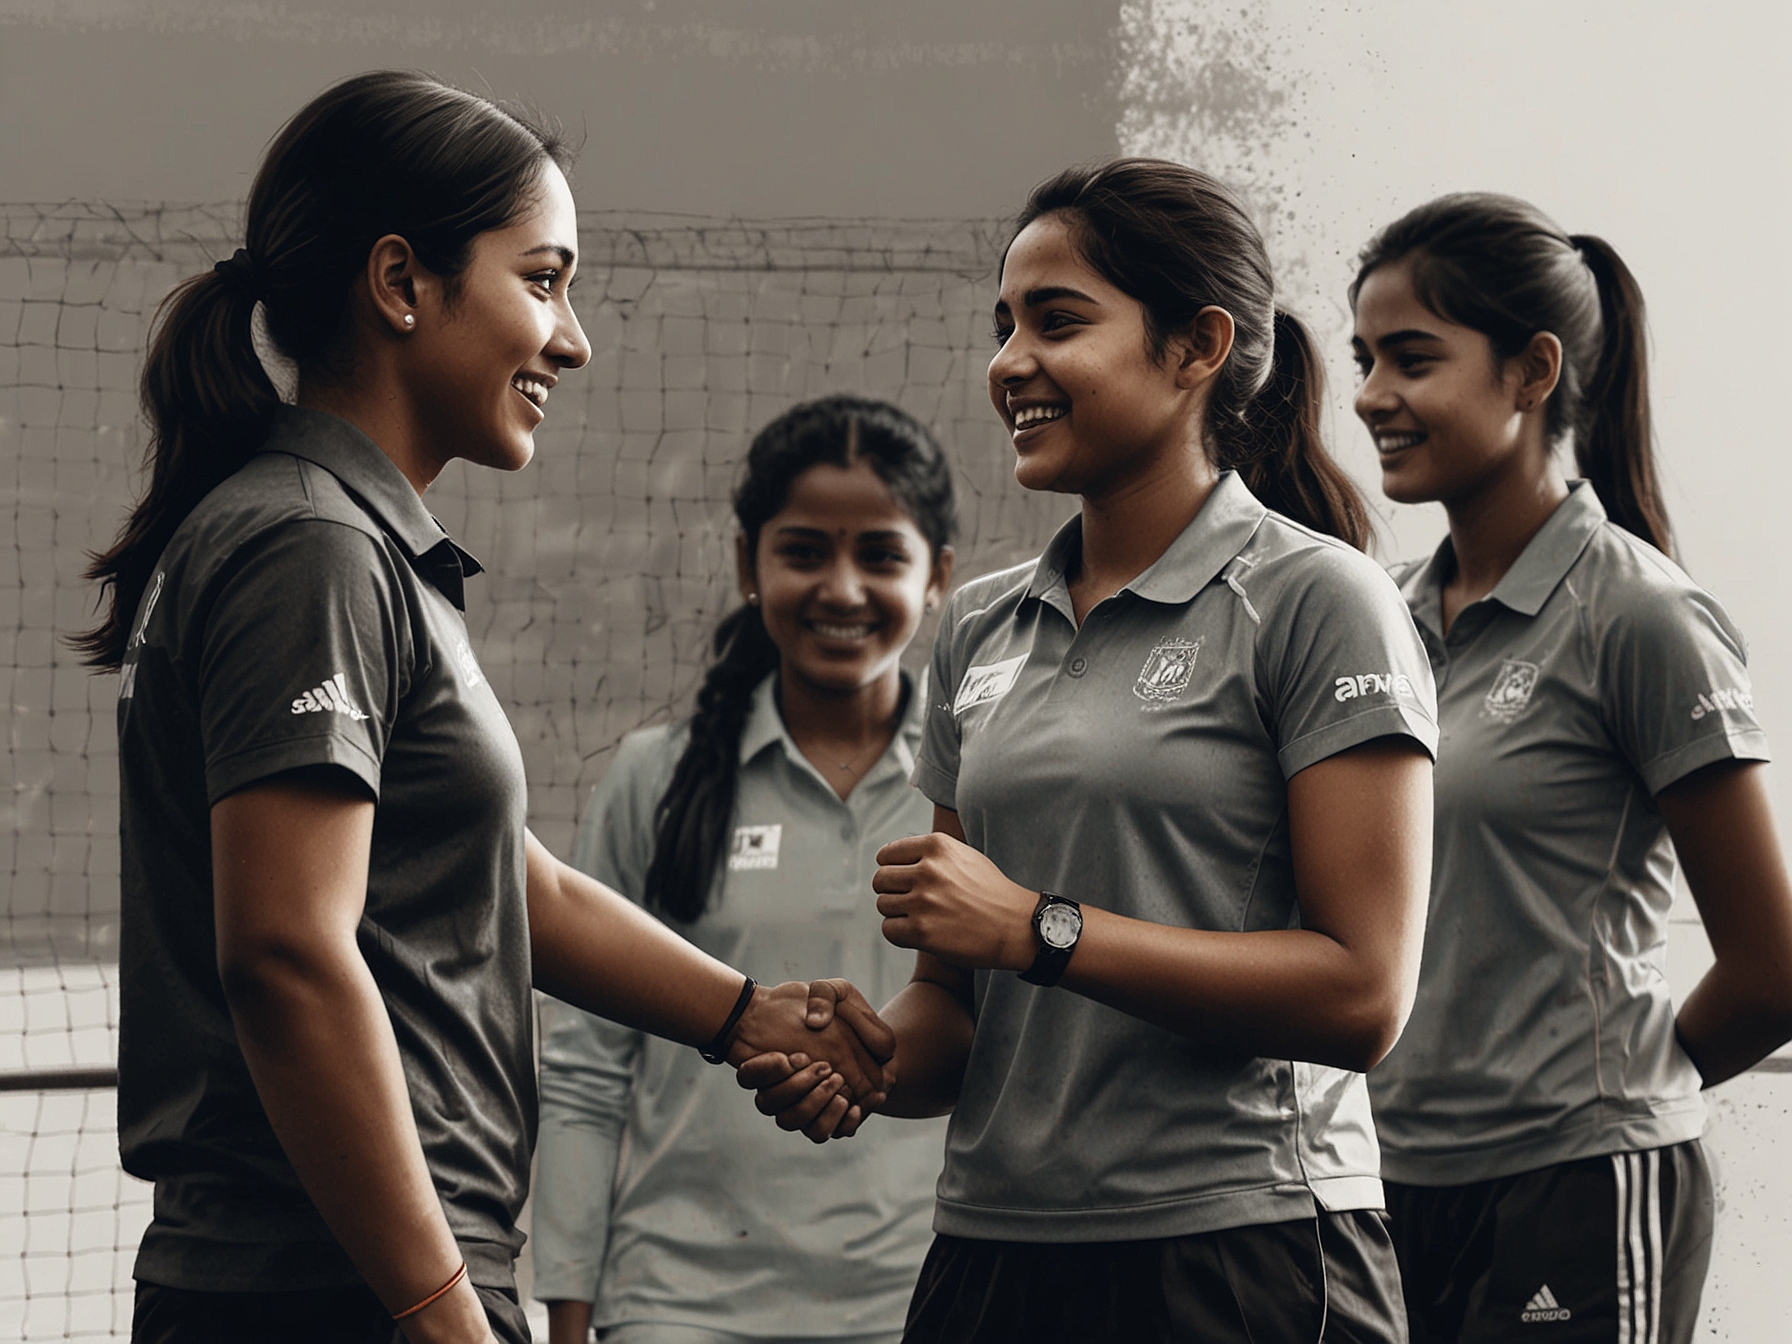 Ankita Bhakat being congratulated by her coaches and support staff after winning her match, reflecting the teamwork and strategic planning behind her success.